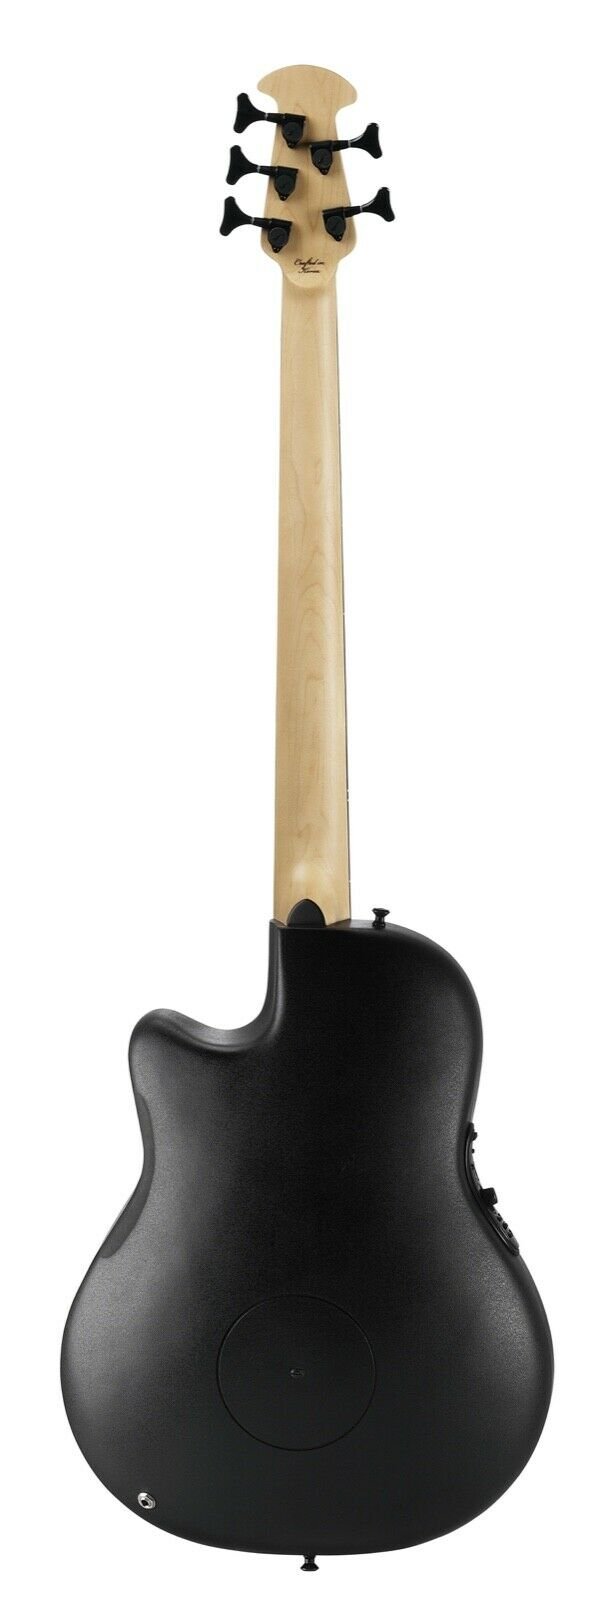 Ovation Modern TX 5-String Acoustic Electric Bass - Black